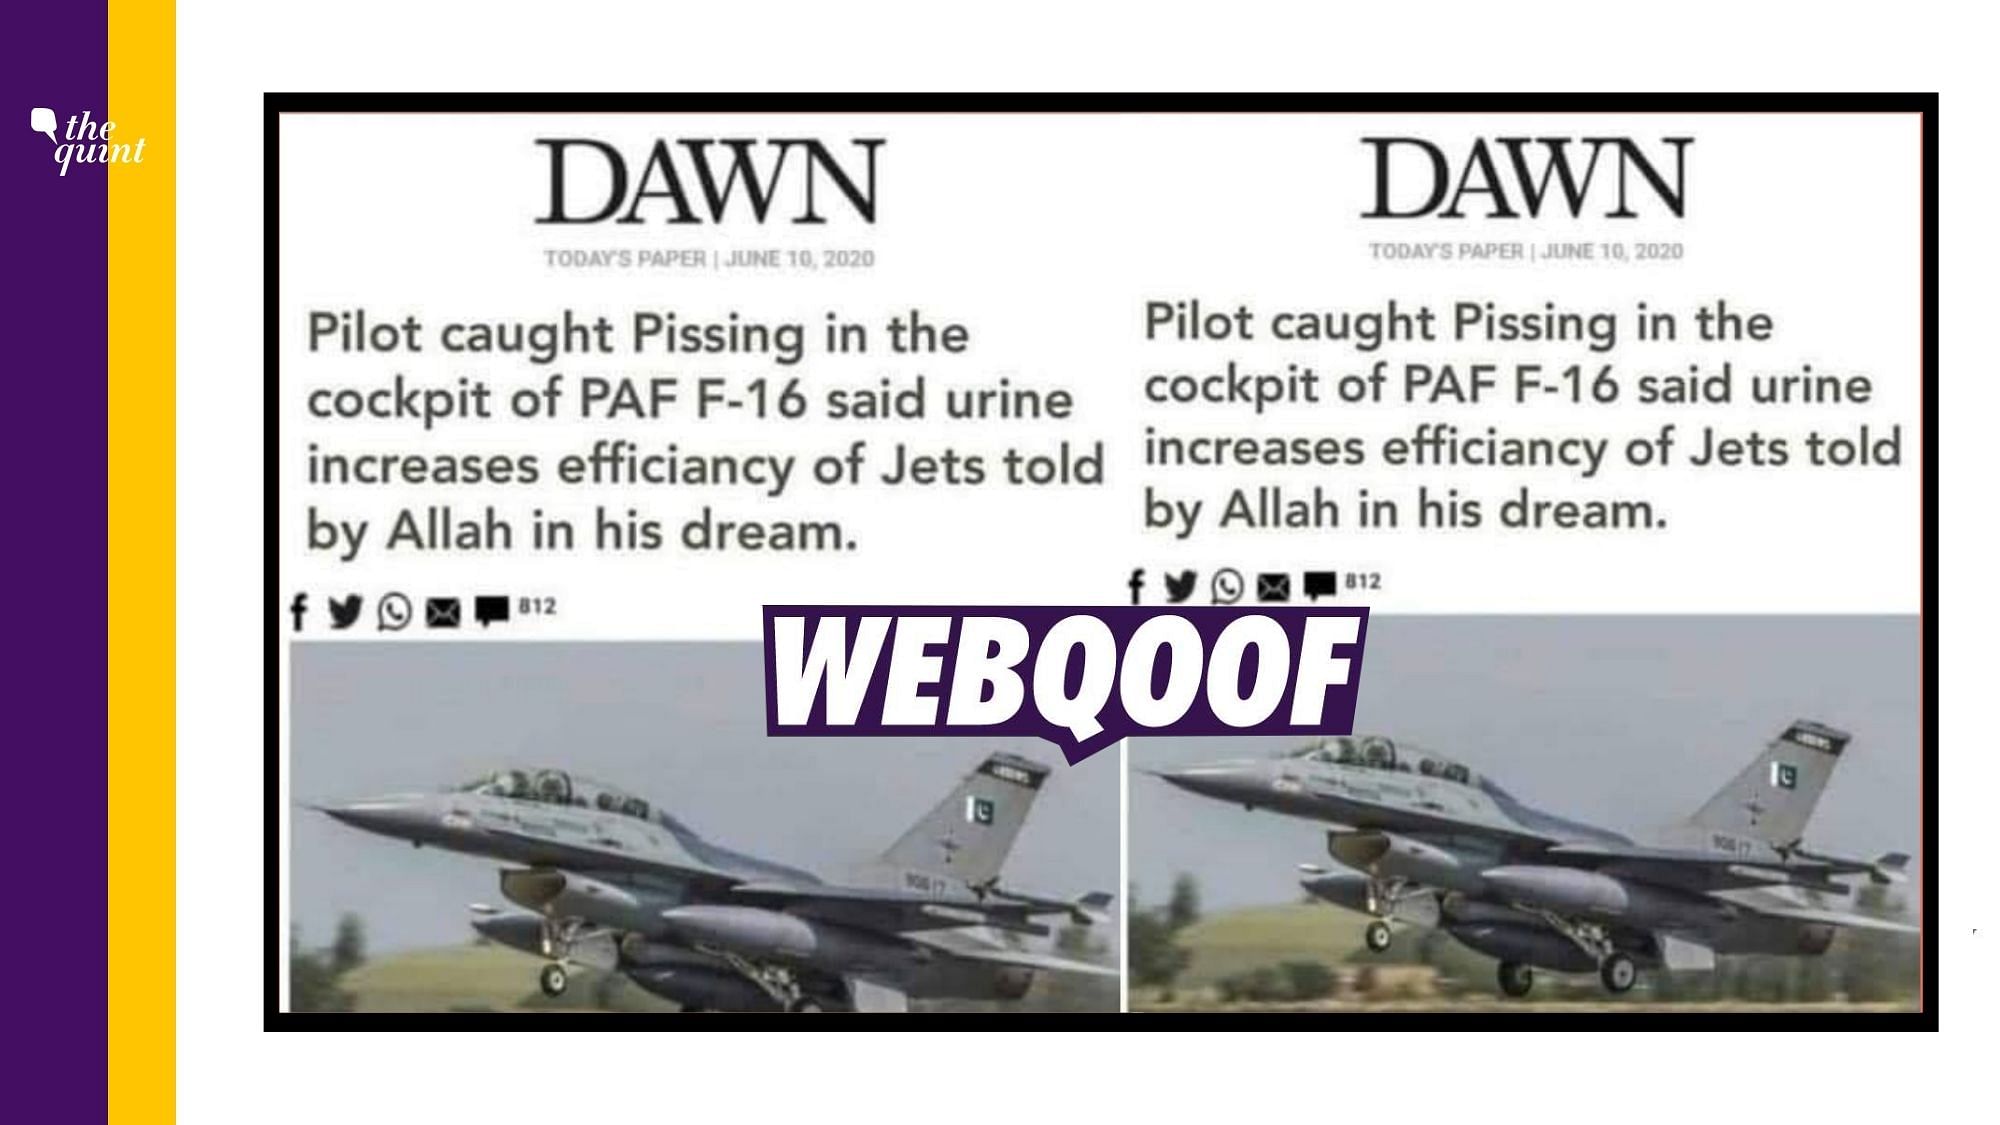 A fake image was circulated to claim that ‘Dawn’ published an article on a pilot being caught urinating in the cockpit of the PAF F-16.